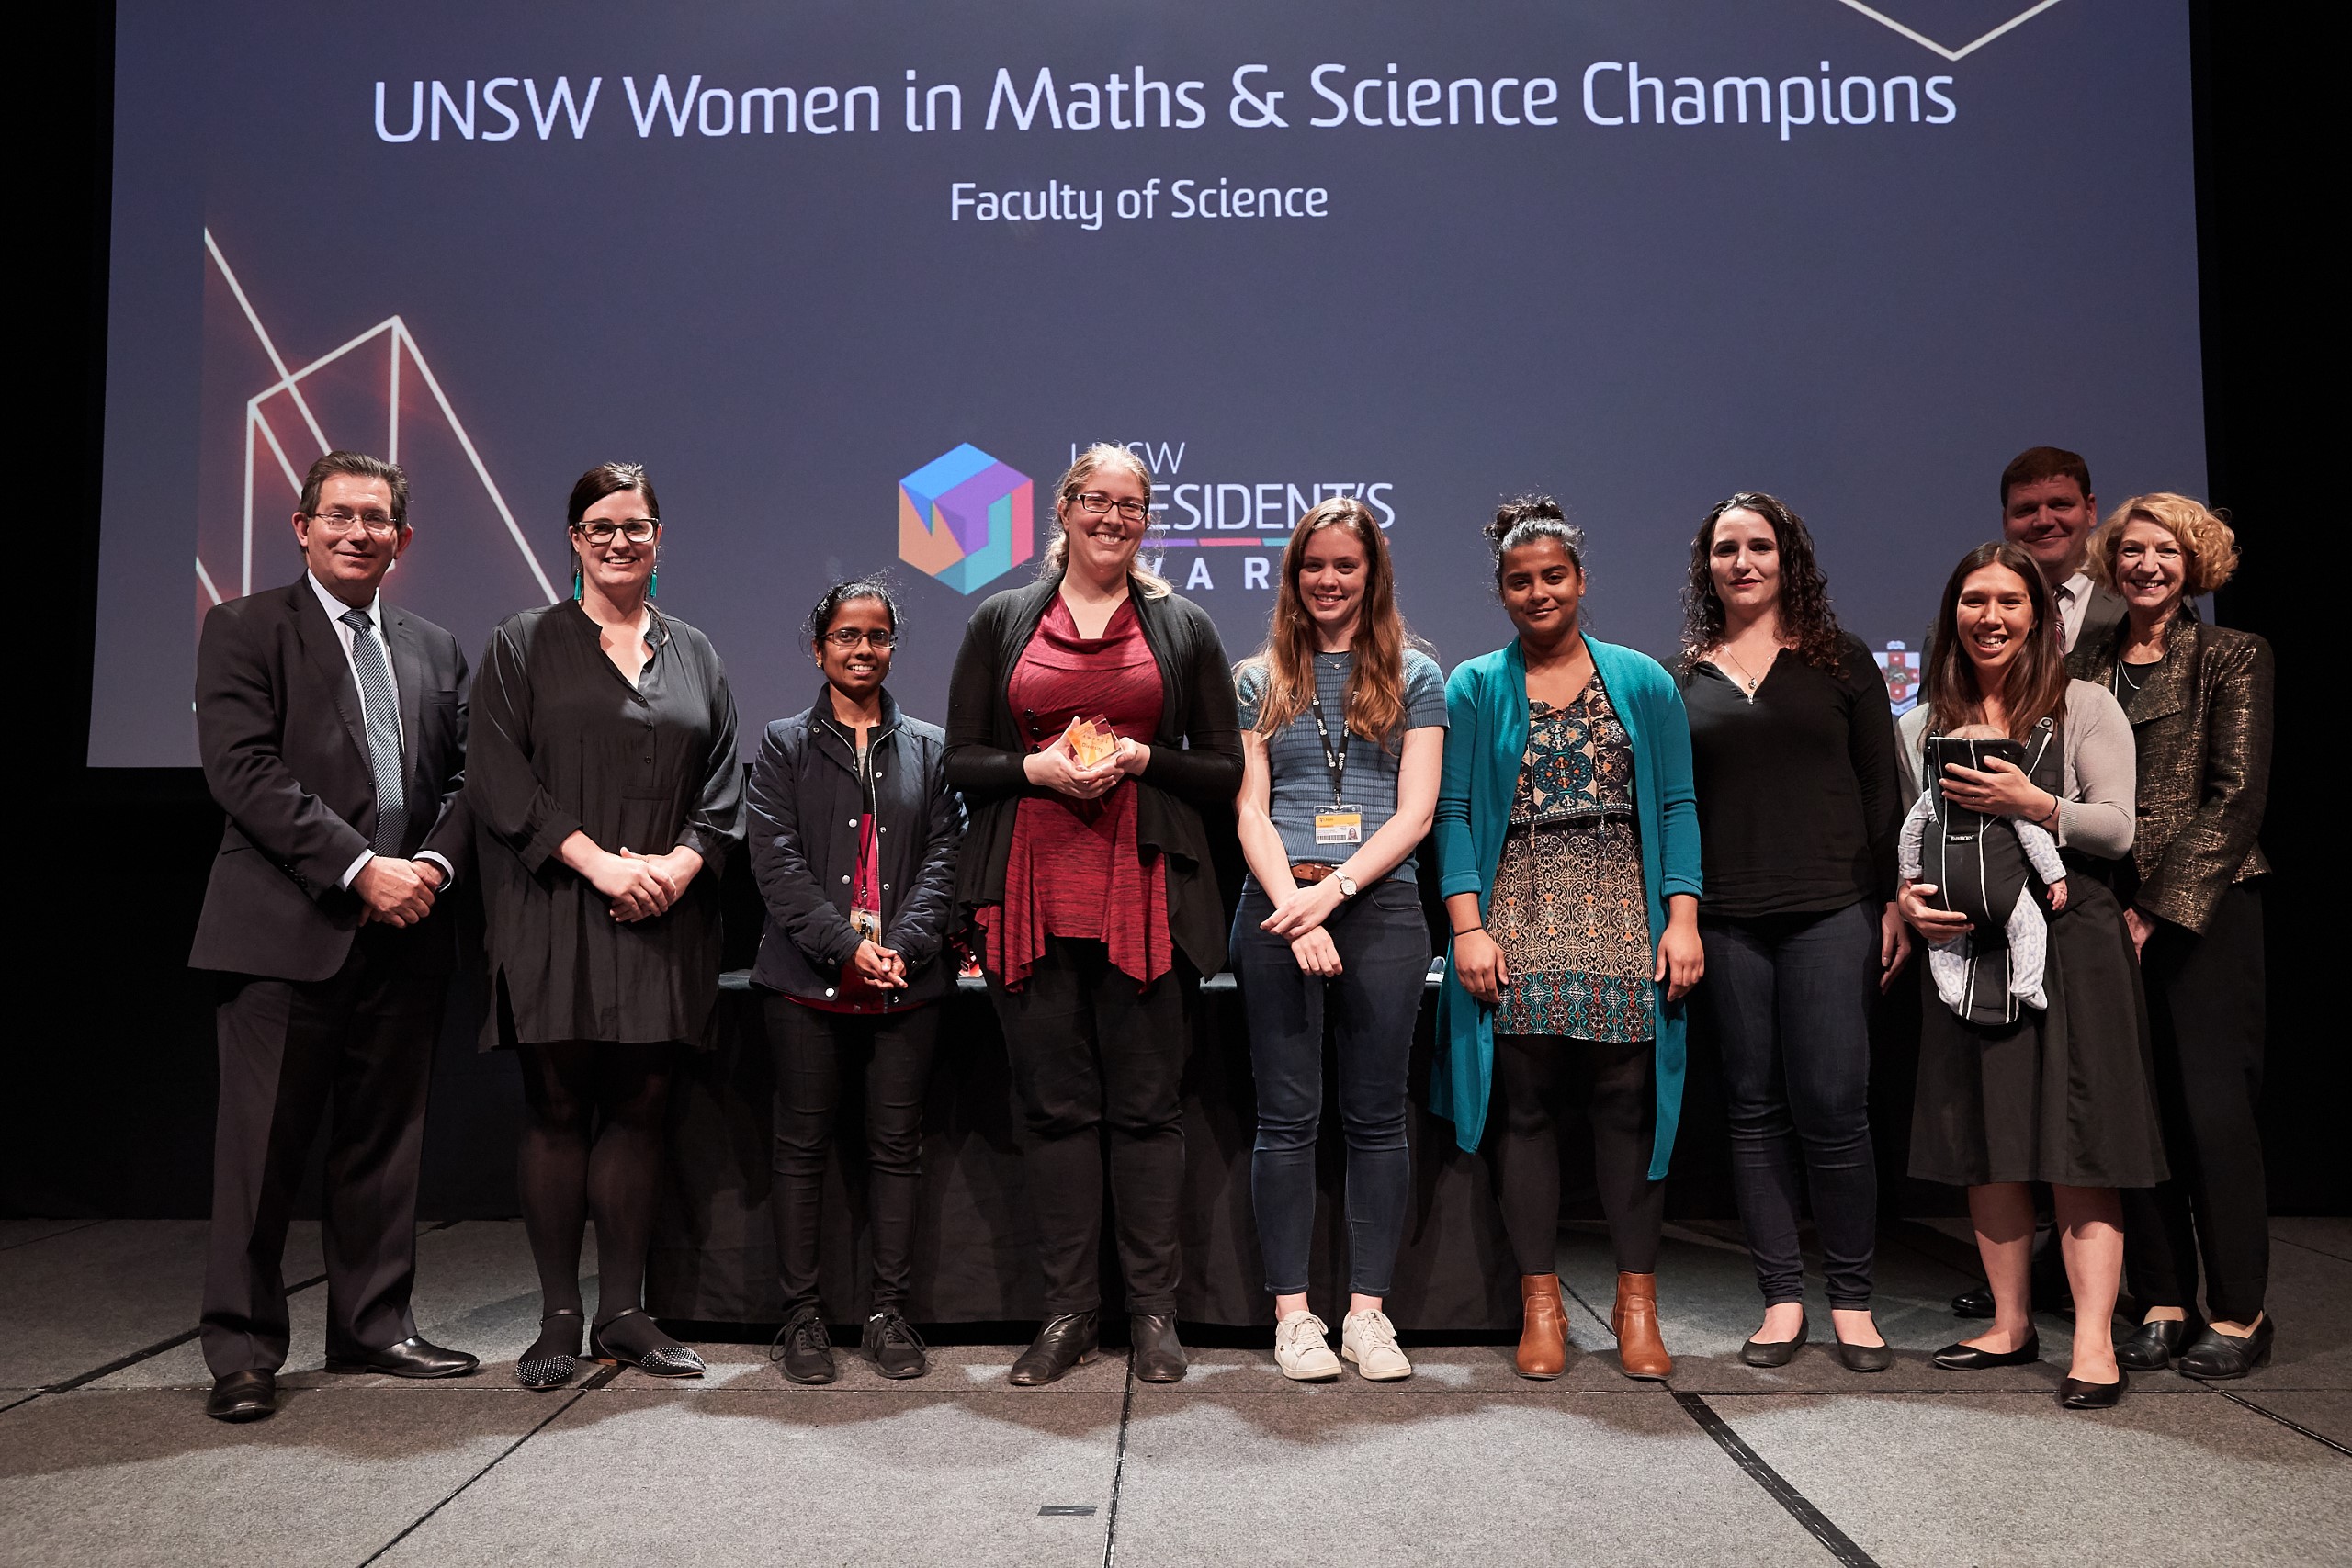 Champions win UNSW President’s Award for Embracing Diversity